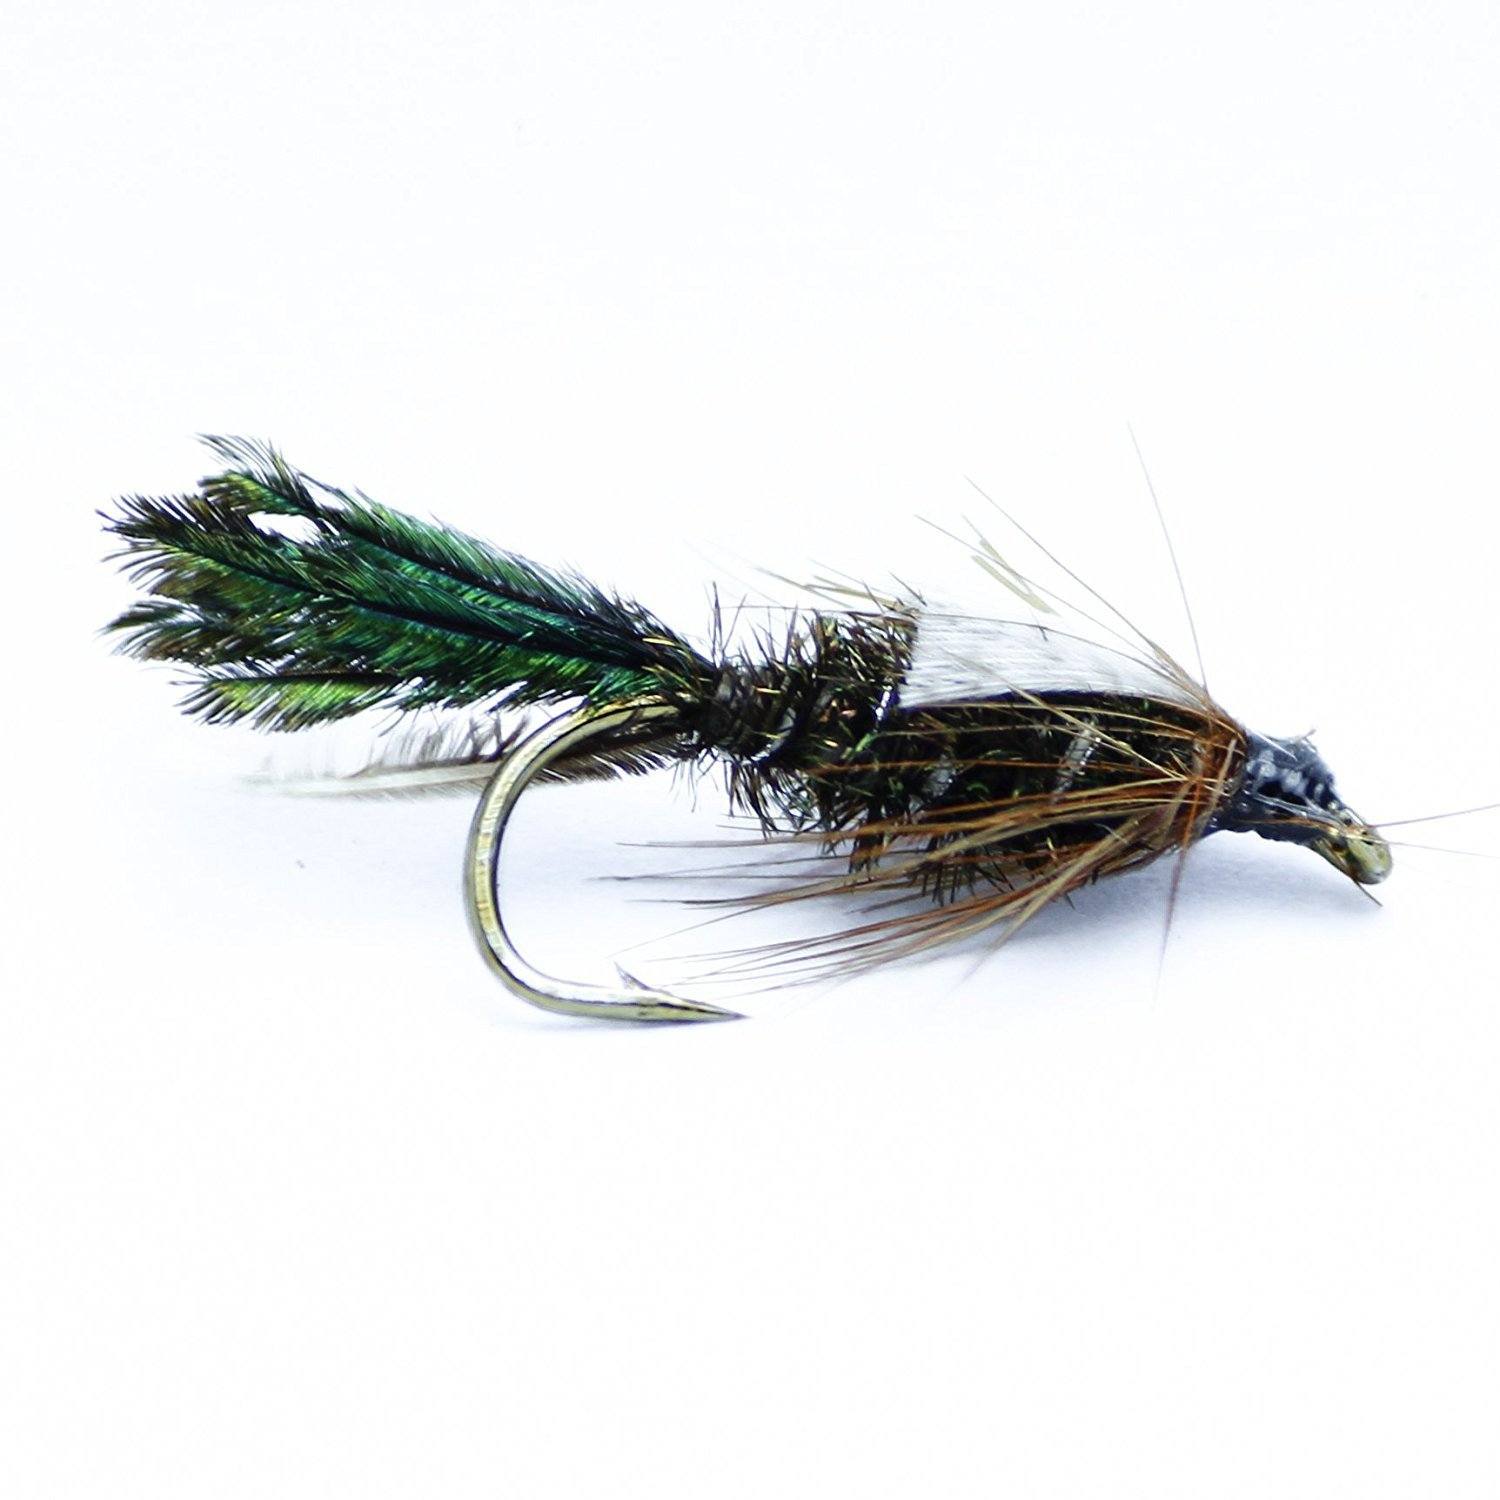 Feeder Creek Fly Fishing Assortment, 24 Dry Flies in 8 Patterns (Adams Fly,  Renegade, Dun and More) for Trout, Bass and Salmon, Size 14, Includes Fly